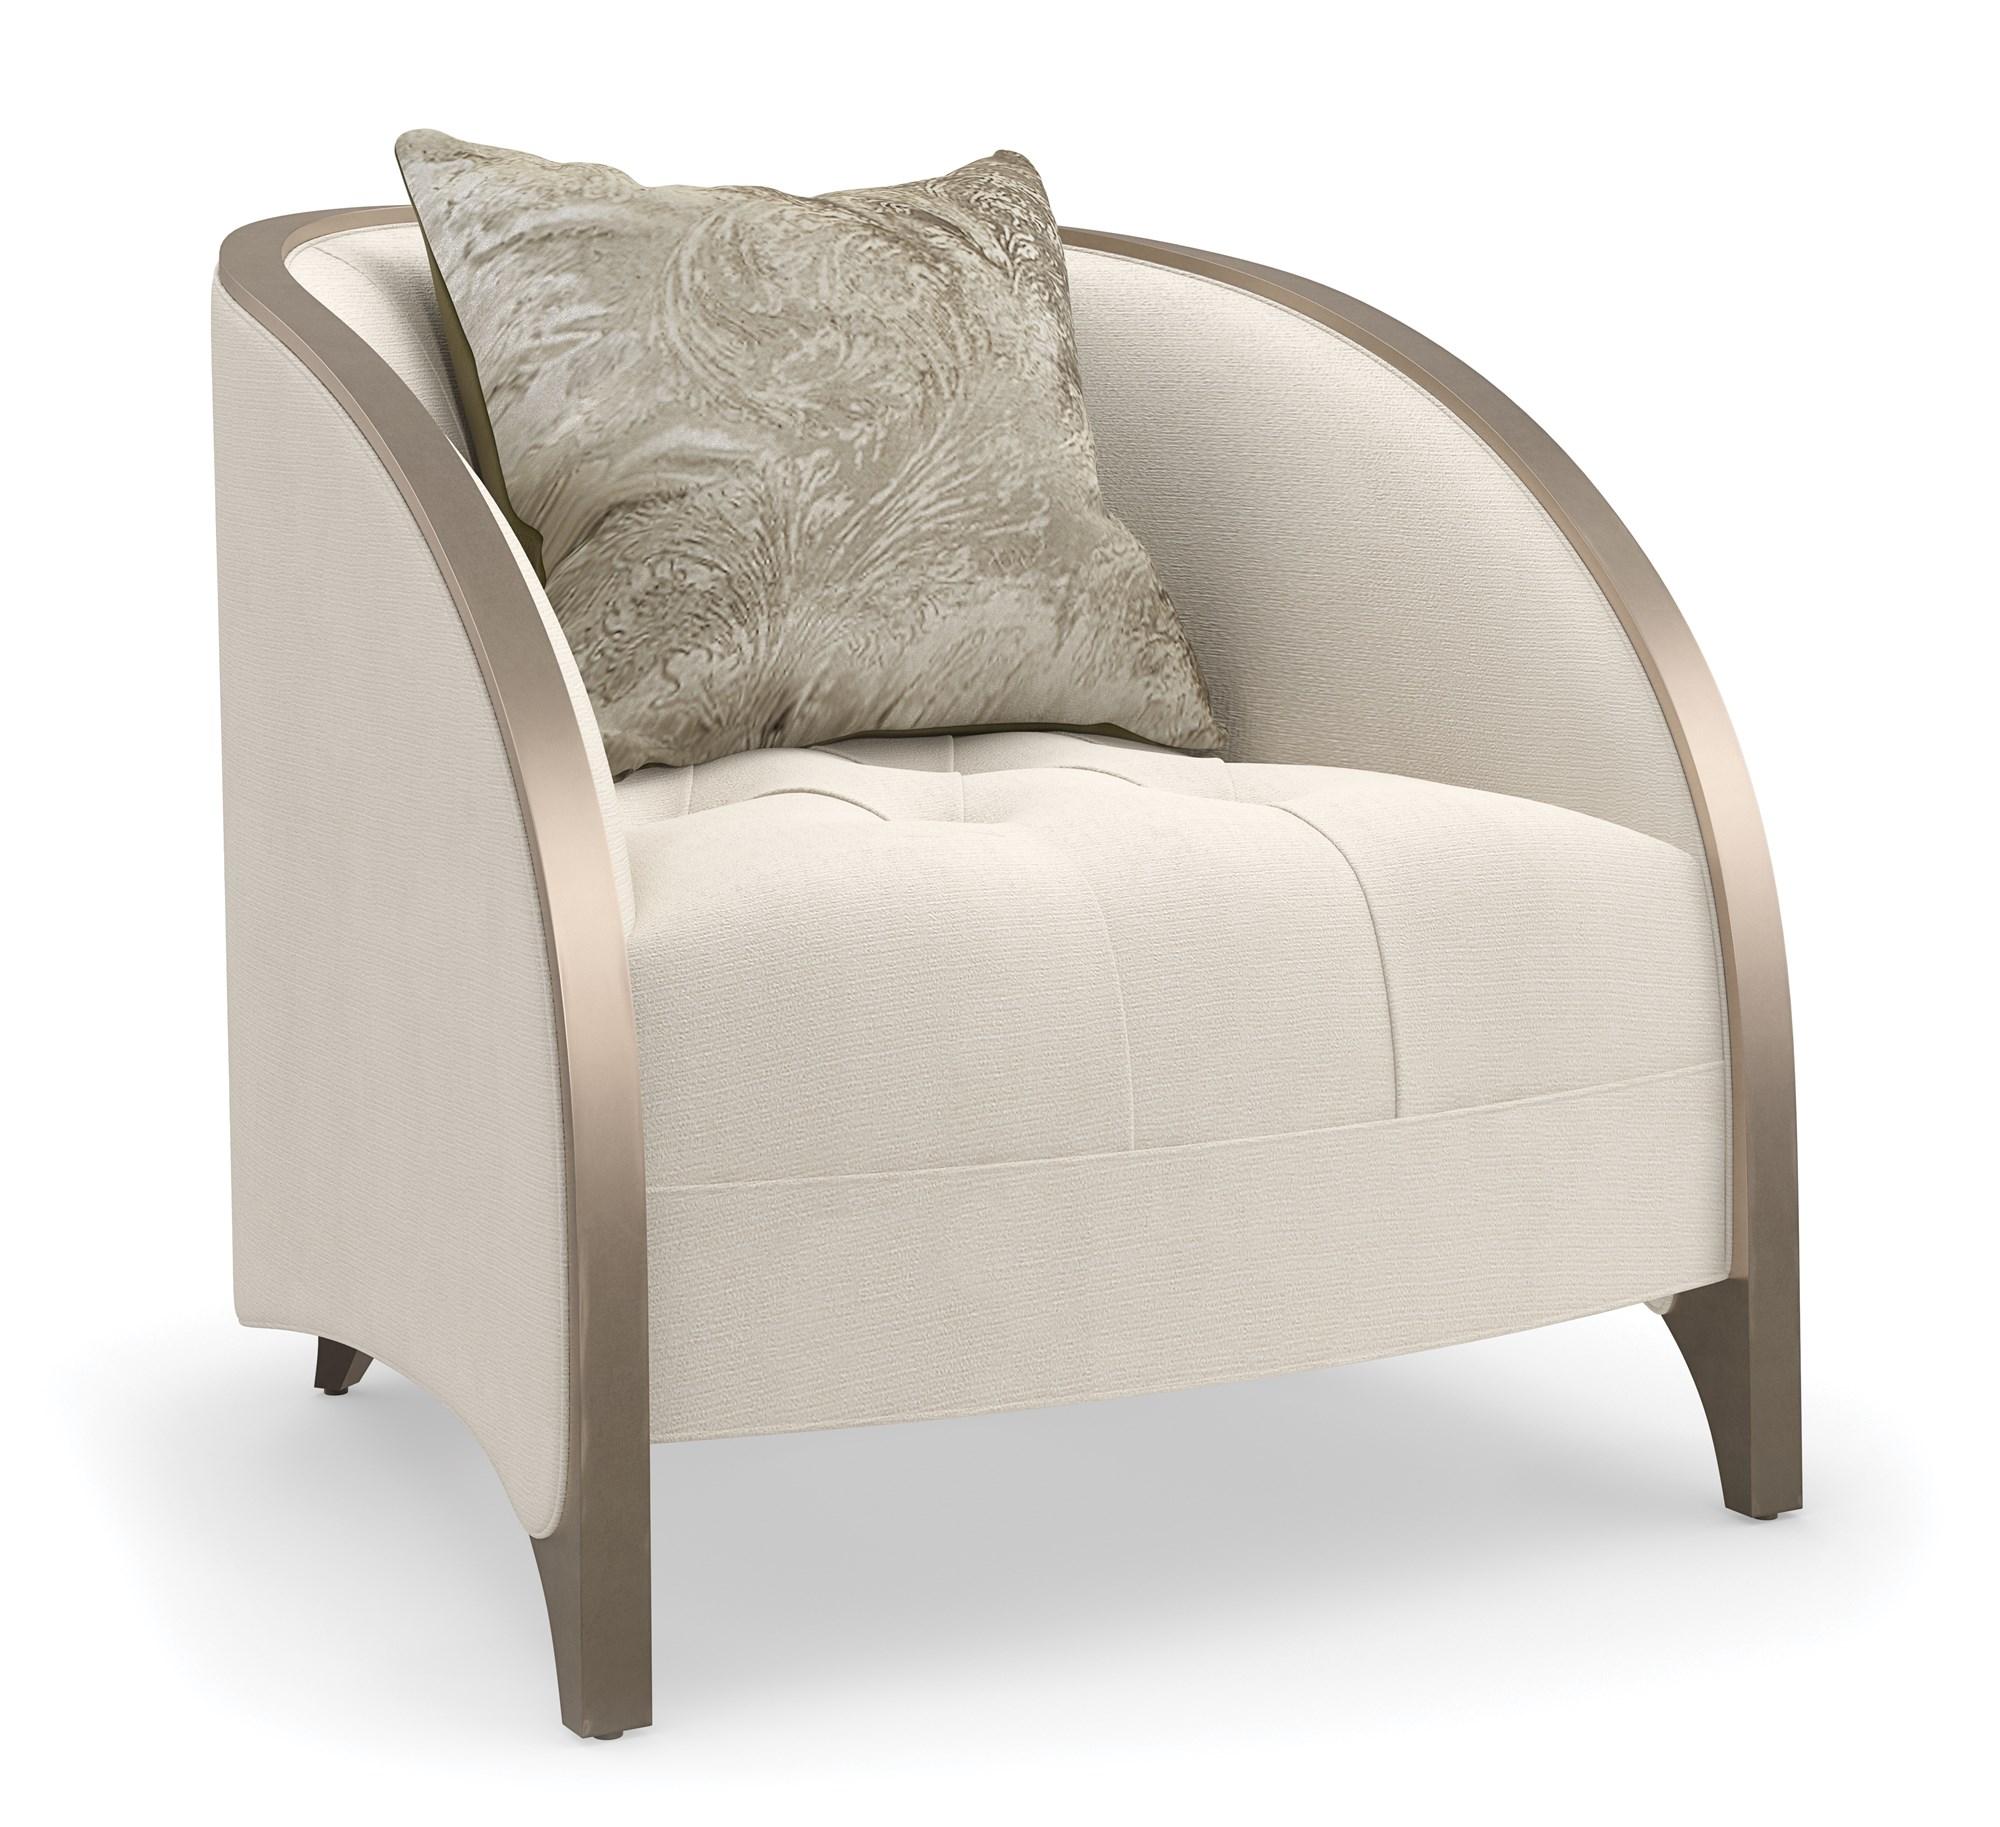 Traditional Matching Chair VALENTINA MATCHING CHAIR C110-422-031-A in Cream, Gold Chenille